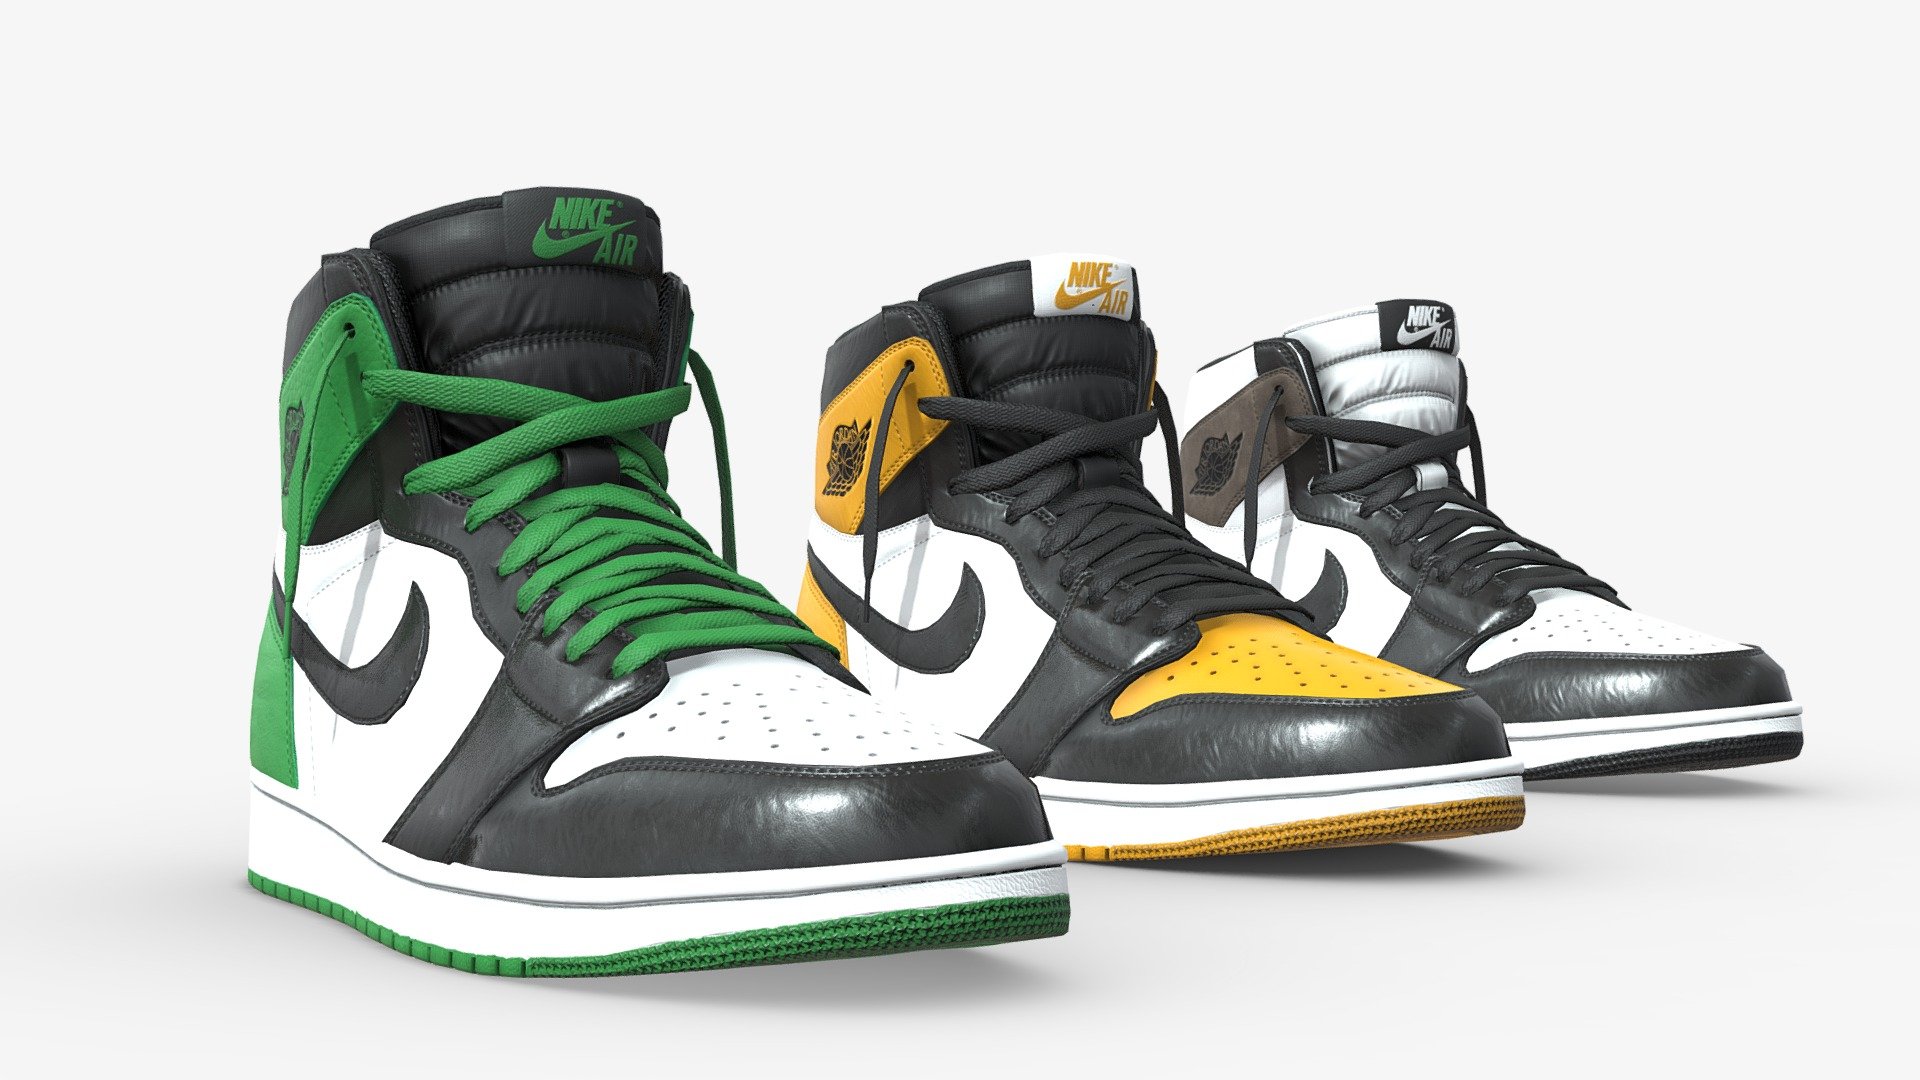 Modelled in Blender and textured in Substance, this is an updated version of my Jordan 1. Featuring a nicer overall silohouette and better stitching, along with other subtle improvements. This pack contains three colourways, Lucky Green, Taxi, Mocha. 

The shoes are relatively low poly, coming it at 21,601 faces per shoe (43,202 per pair) and uses 1 texture set for both left and right shoes. Textures are: Base Color, Metallic, Normal, Roughness, AO and all at 4096x4096

In the additional files you'll find textures for the left shoe, along with blender, obj, and fbx files

(The dangling laces are not connected to the main mesh and can be deleted if so desired) - Air Jordan 1 Low Poly Triple Pack - Buy Royalty Free 3D model by Joe-Wall (@joewall) 3d model